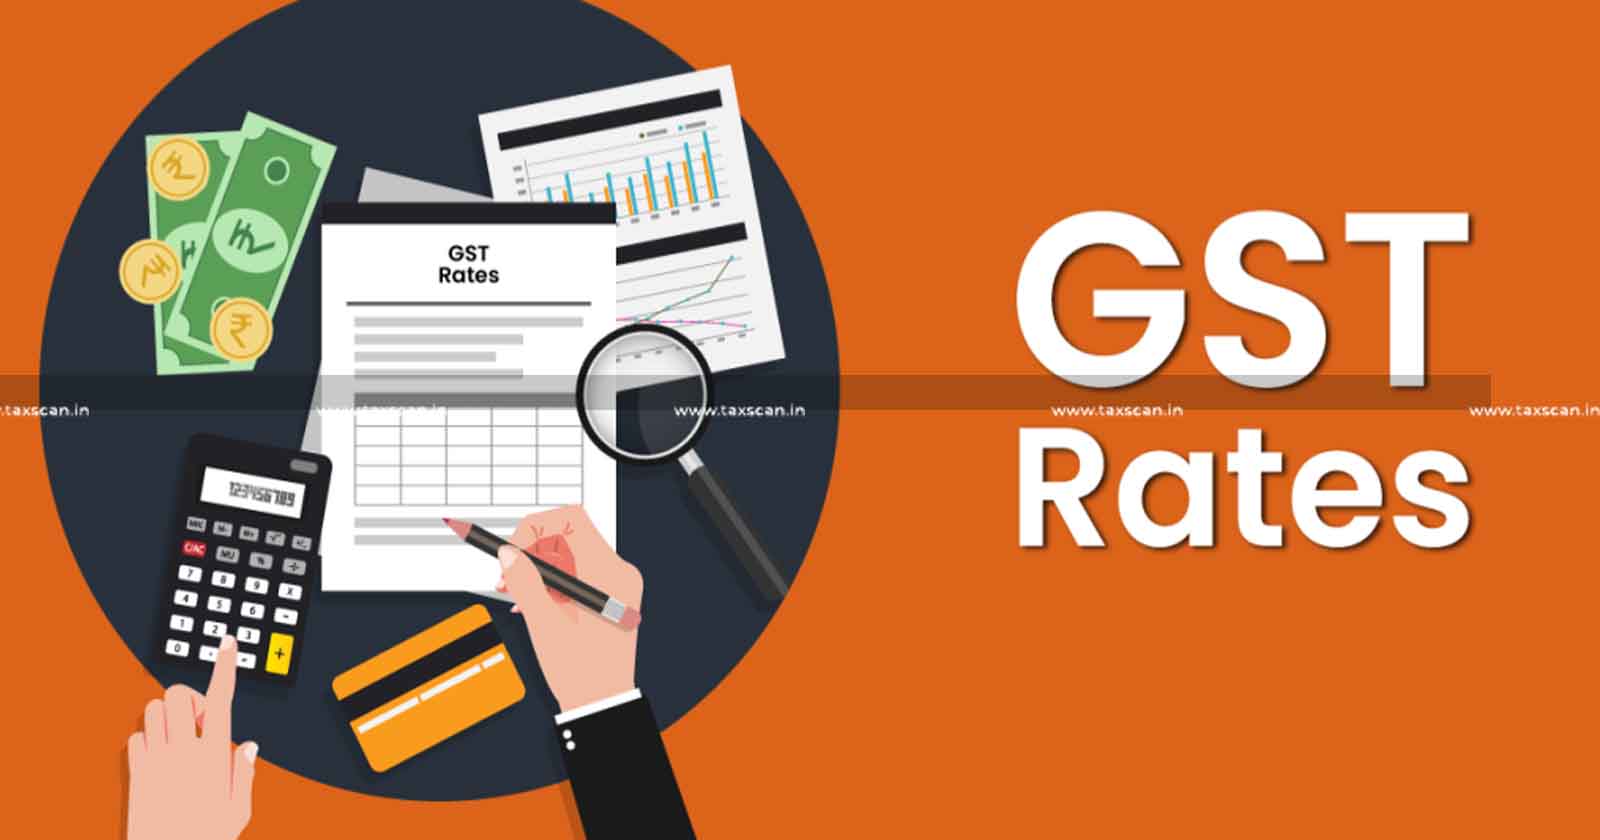 GST - GST Rates - Section 14 of Goods and Services Tax Act - Impact of Revised GST Rates - Tax news - Taxscan